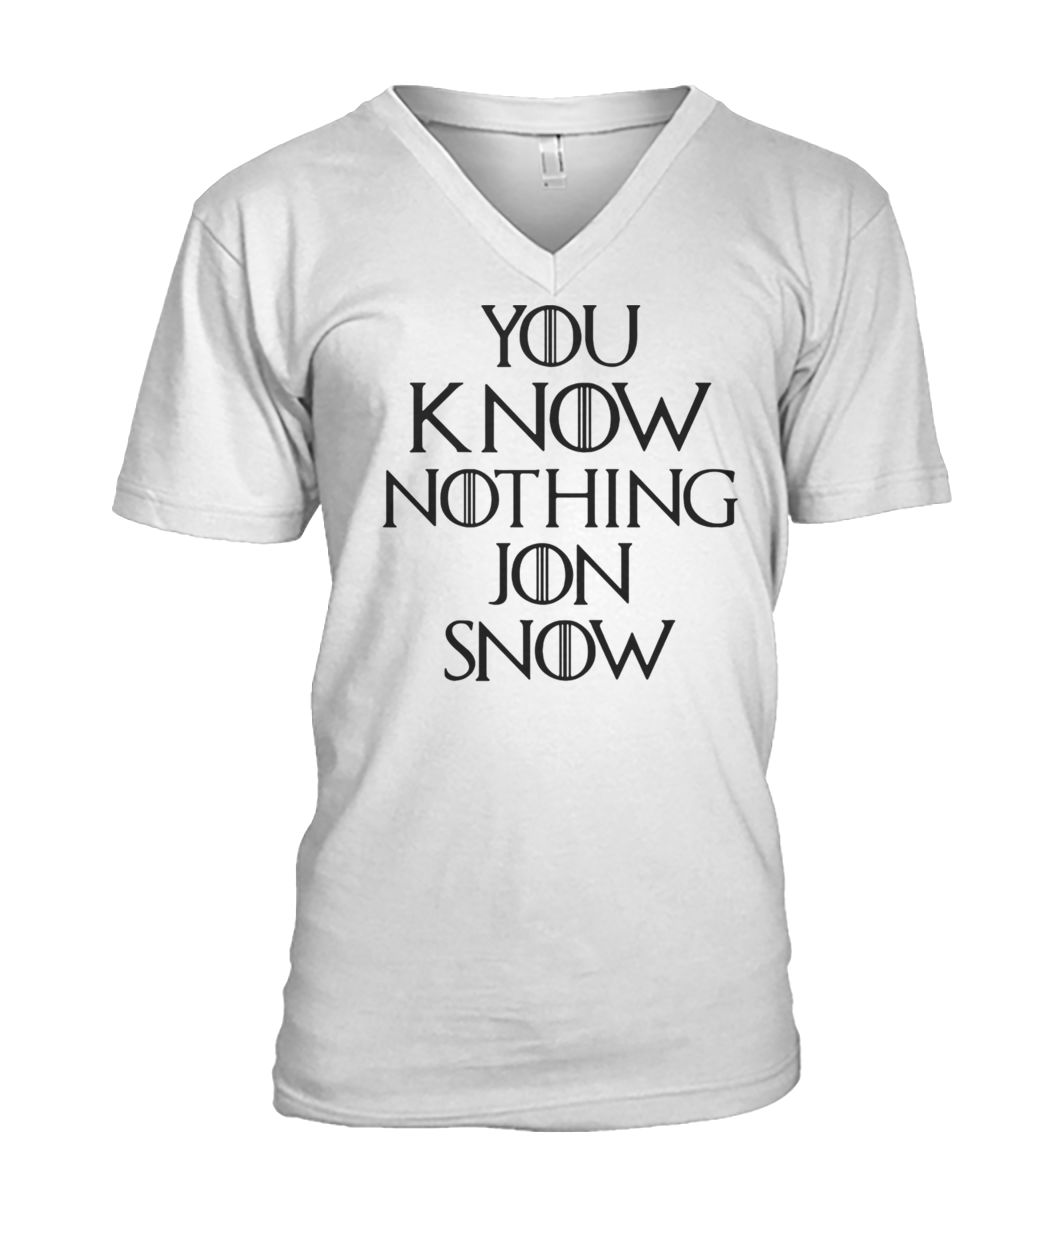 Game of thrones you know nothing jon snow mens v-neck